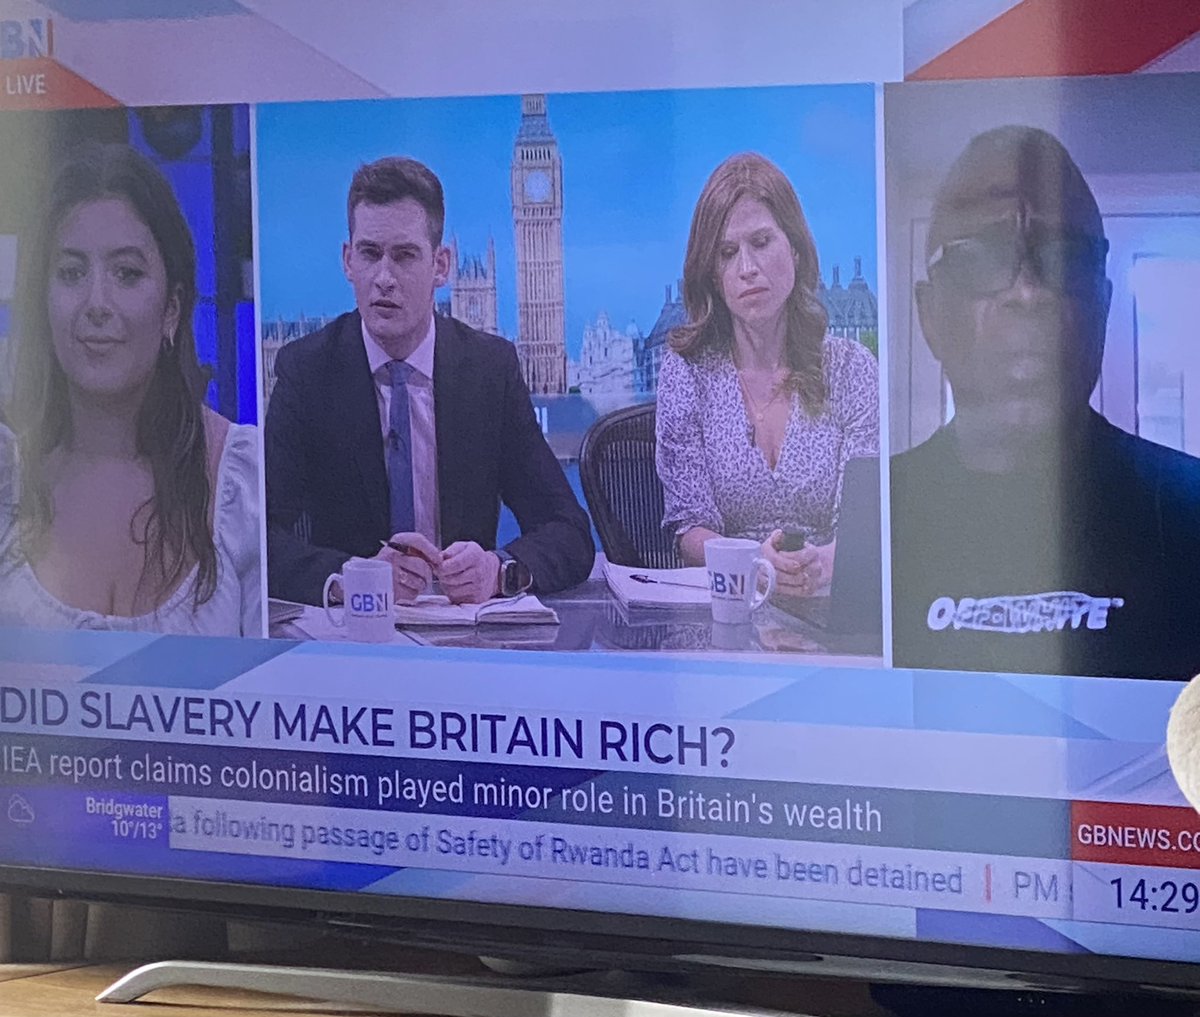 The black man just lied about 4 times! Africa do not send money to the U.K.! Africa are poor because they can’t do anything for themselves! Stop fucking lying and fuck off with your victim crap! @GBNEWS